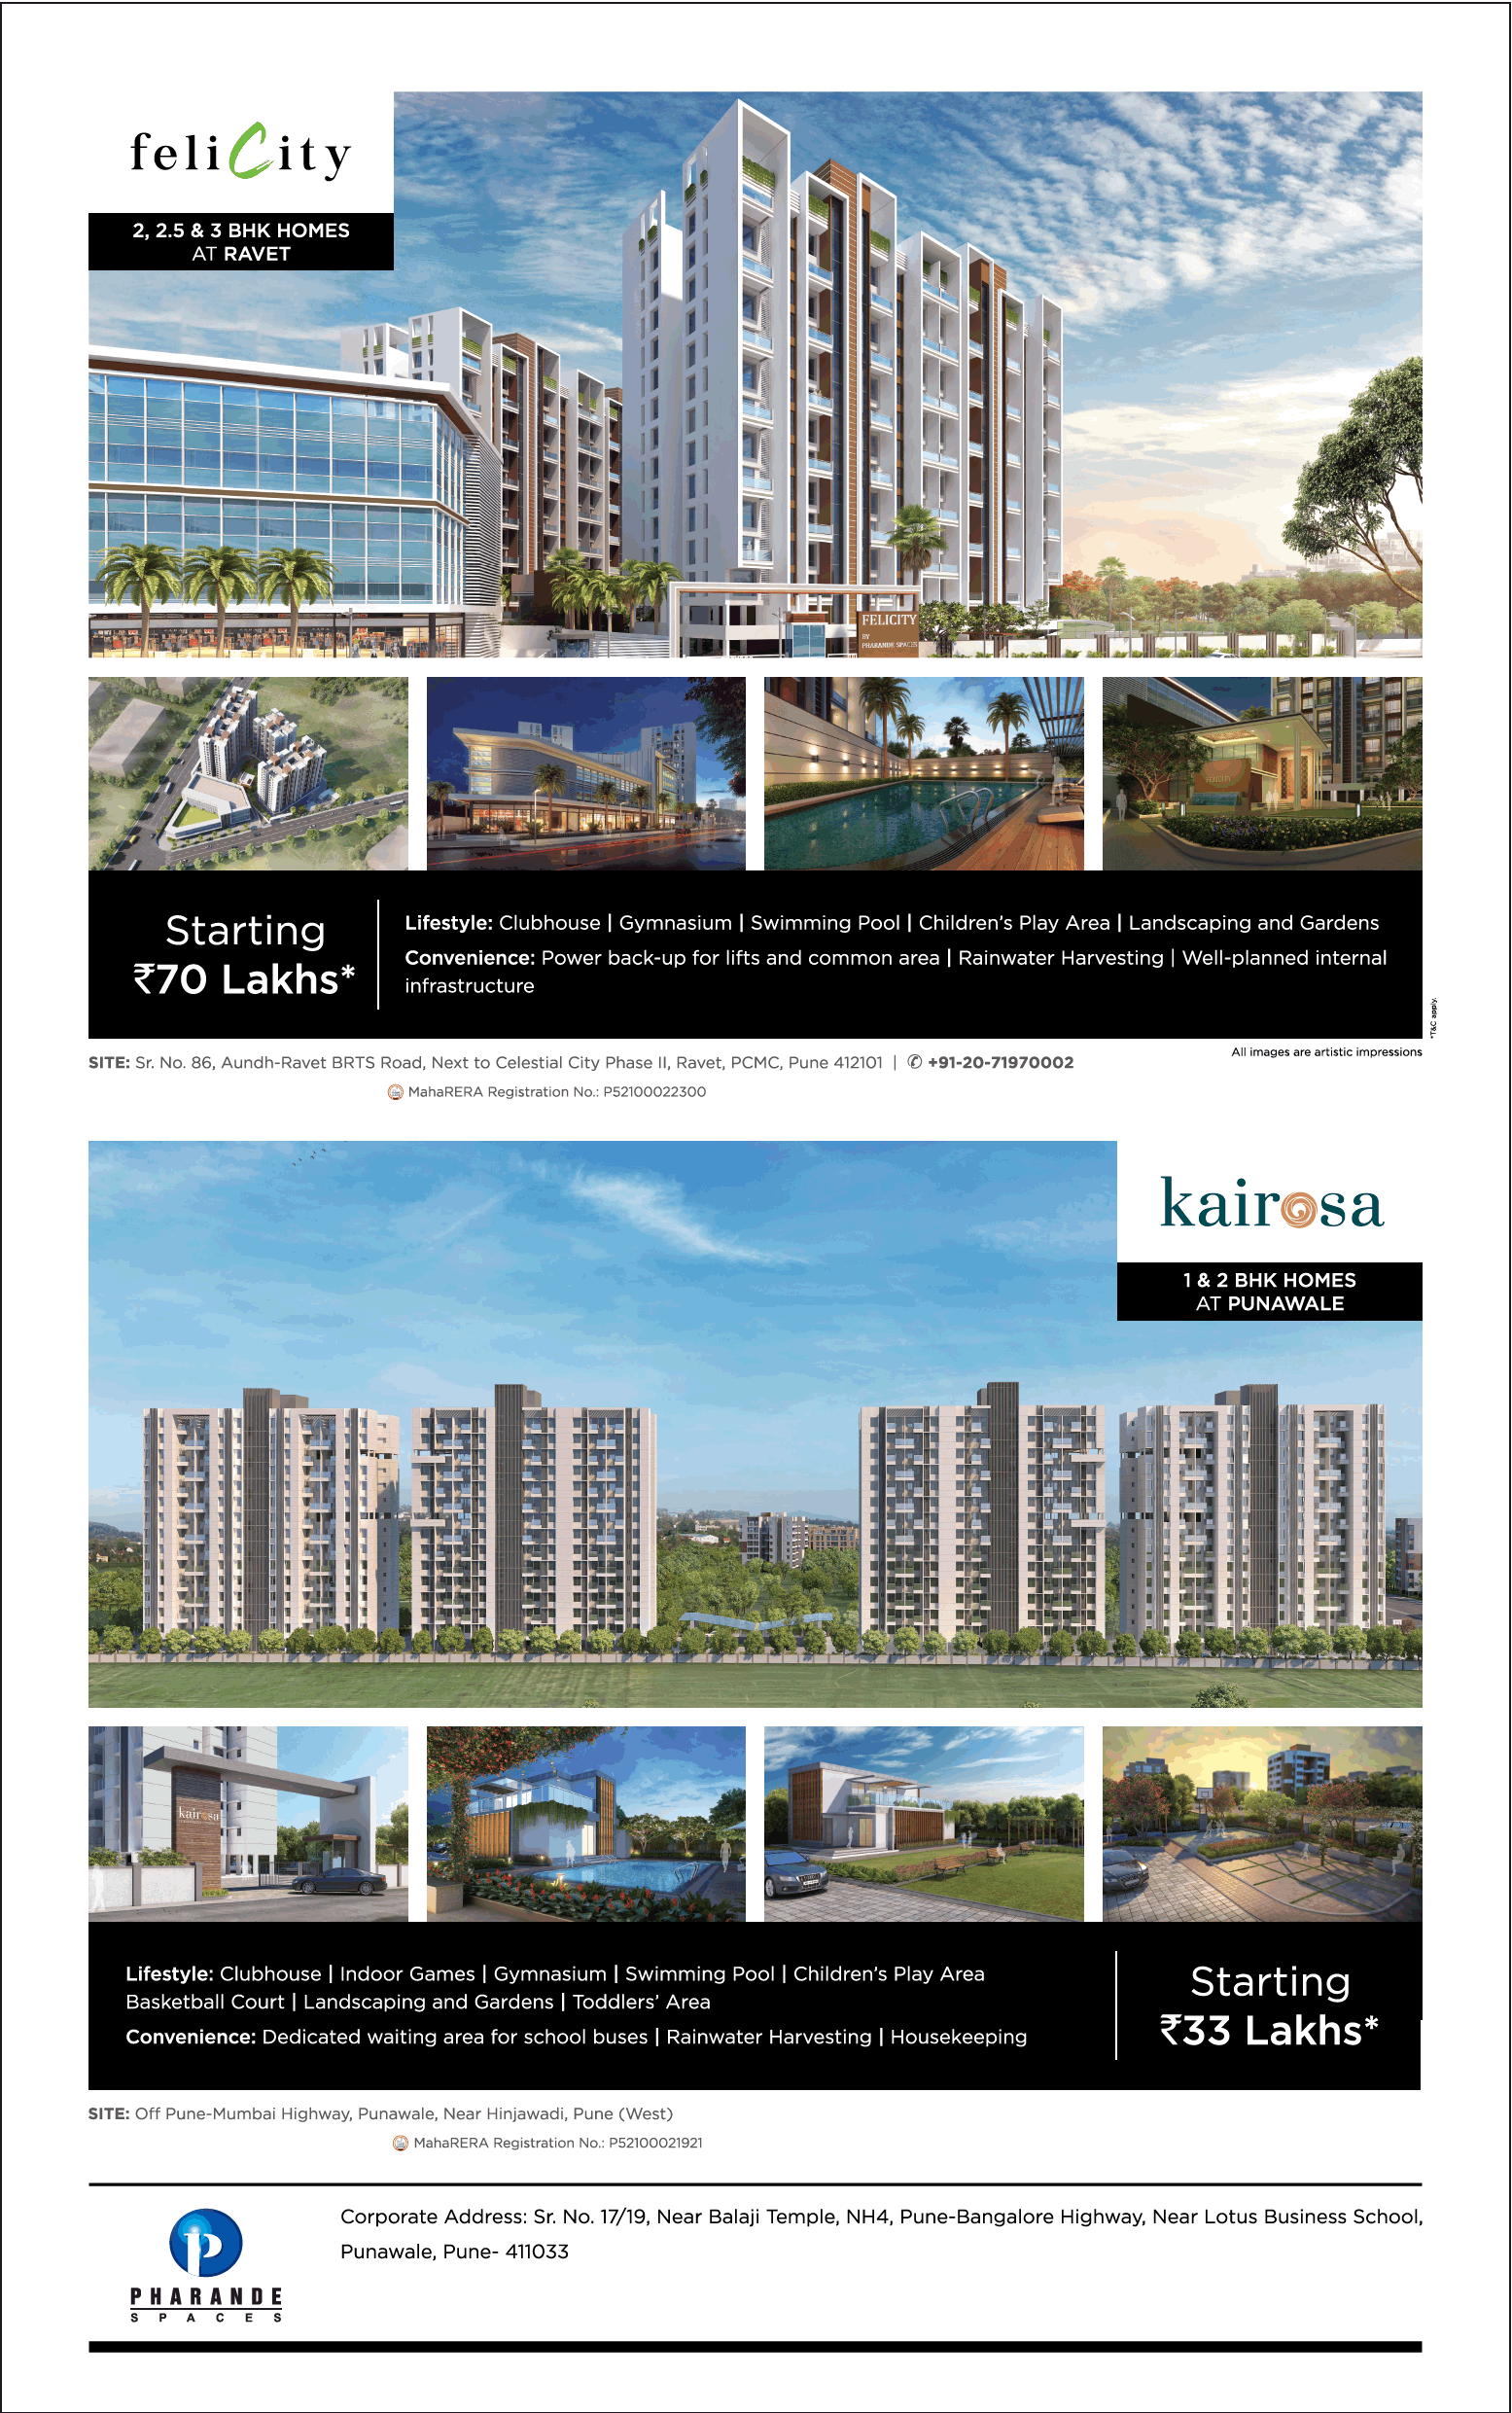 2, 2.5 and 3 BHK homes at Pharande Felicity, Pune Update